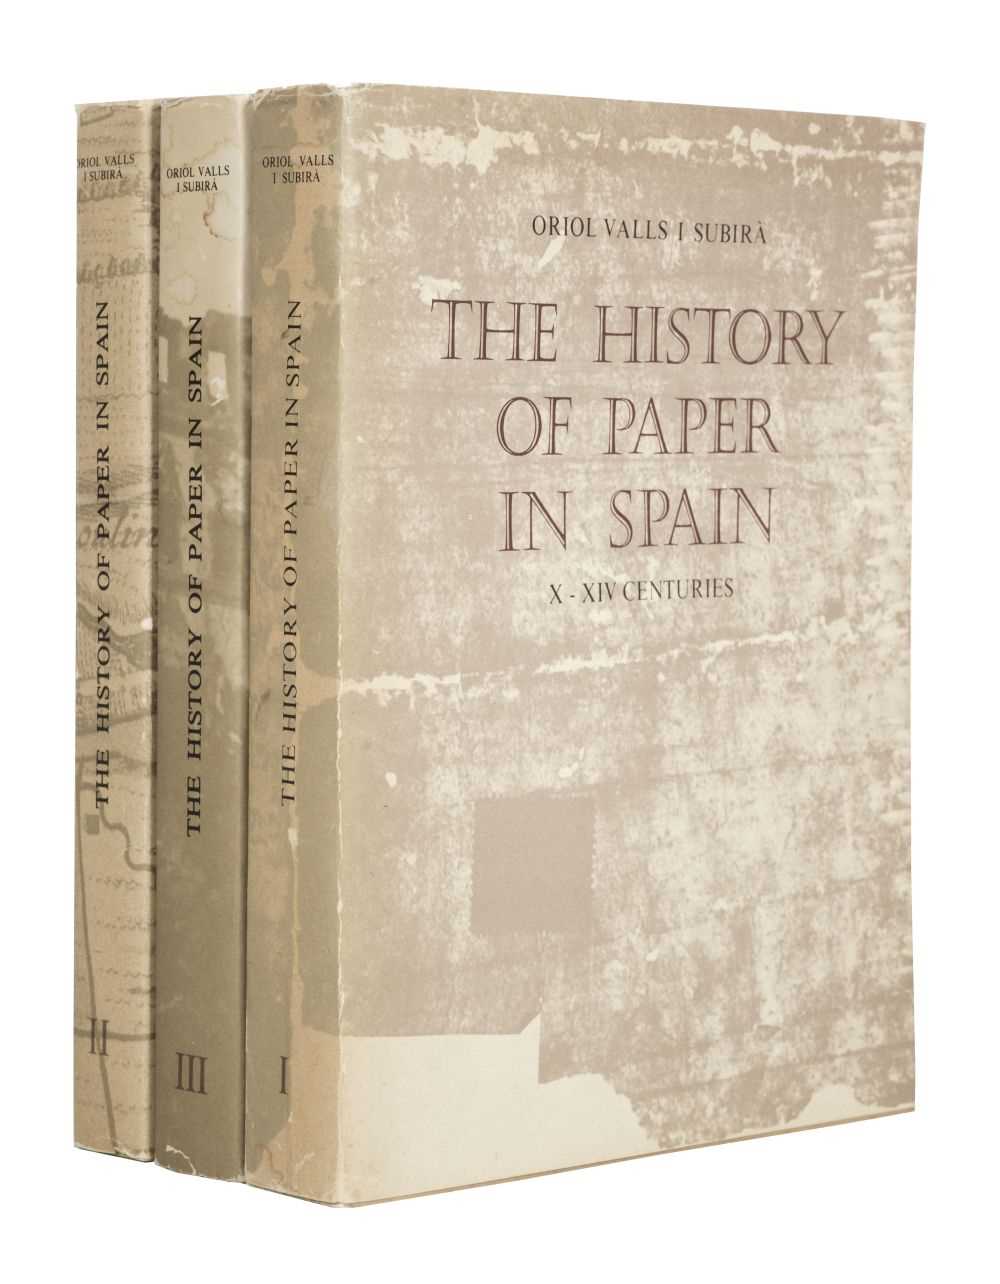 Lot 550 - Valls I Subira (Oriol). The History of Paper in Spain... ,  1978-1982